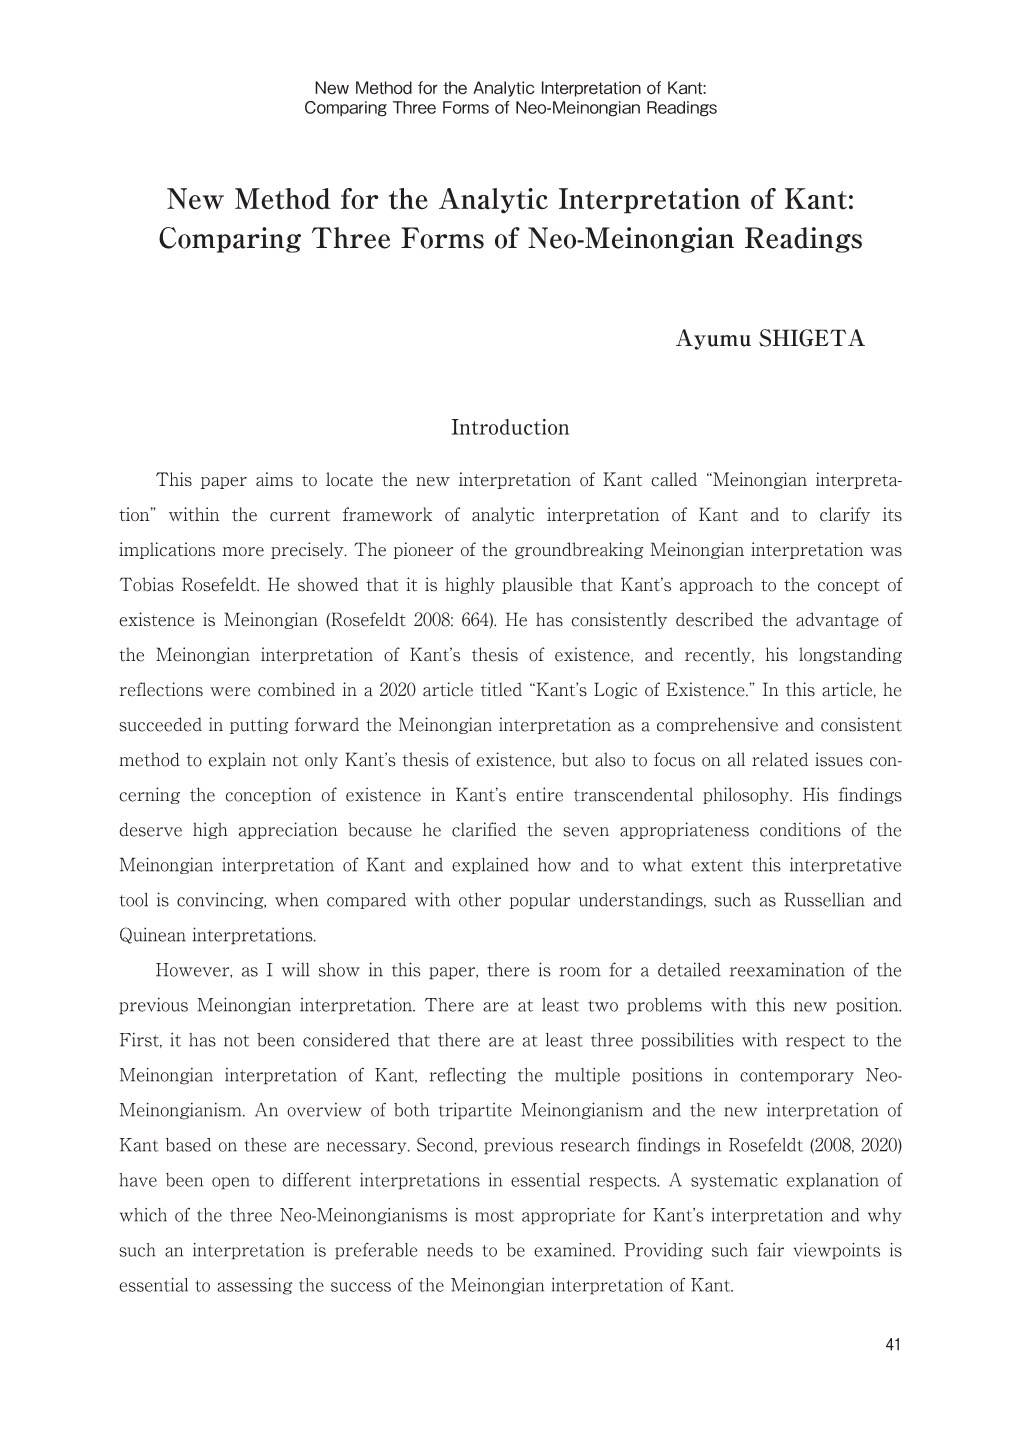 New Method for the Analytic Interpretation of Kant: Comparing Three Forms of Neo-Meinongian Readings